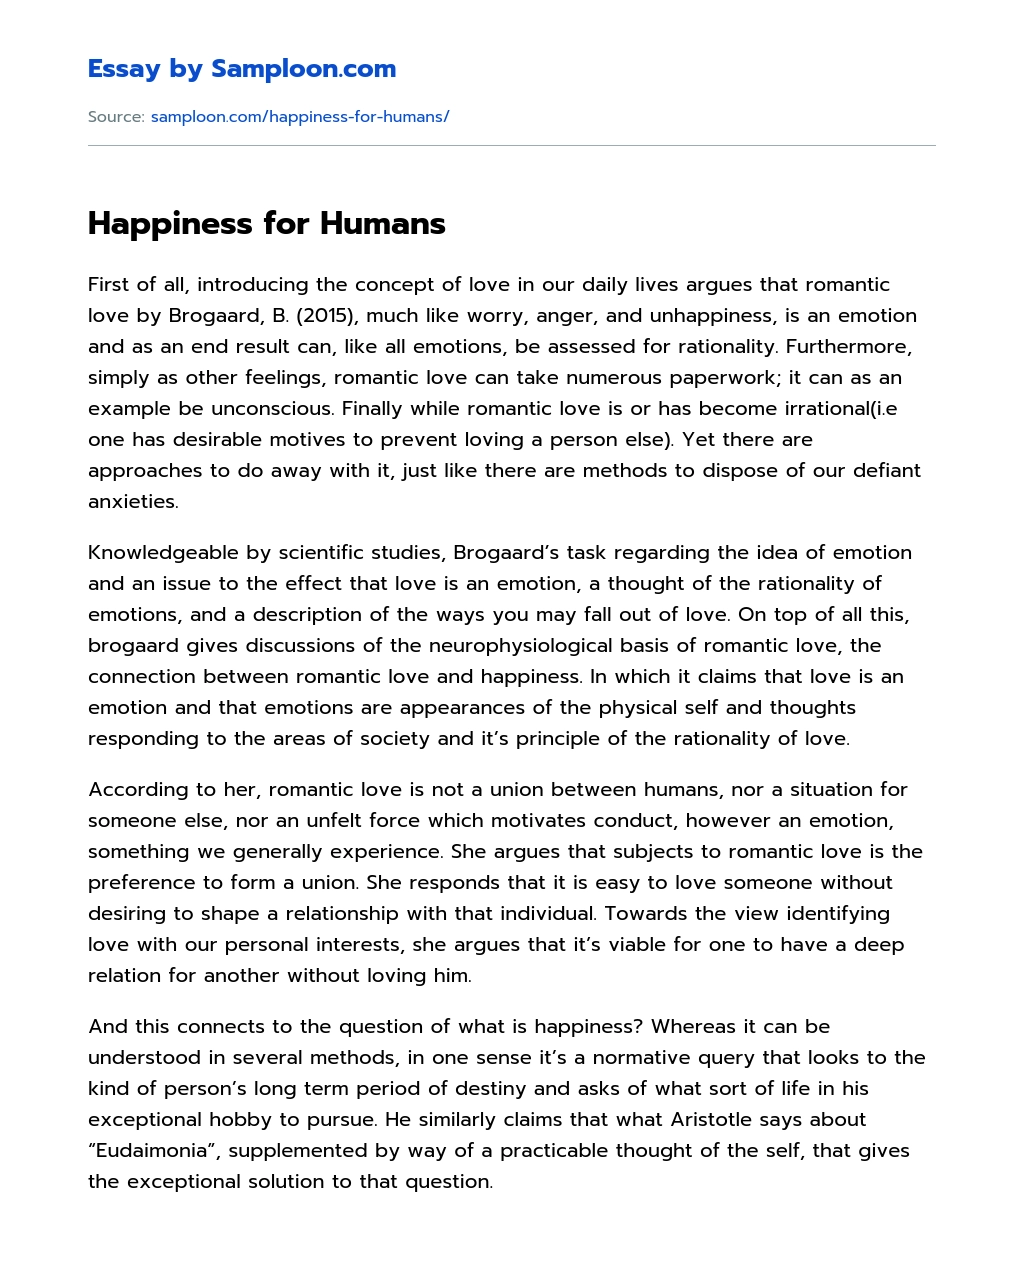 Happiness for Humans essay